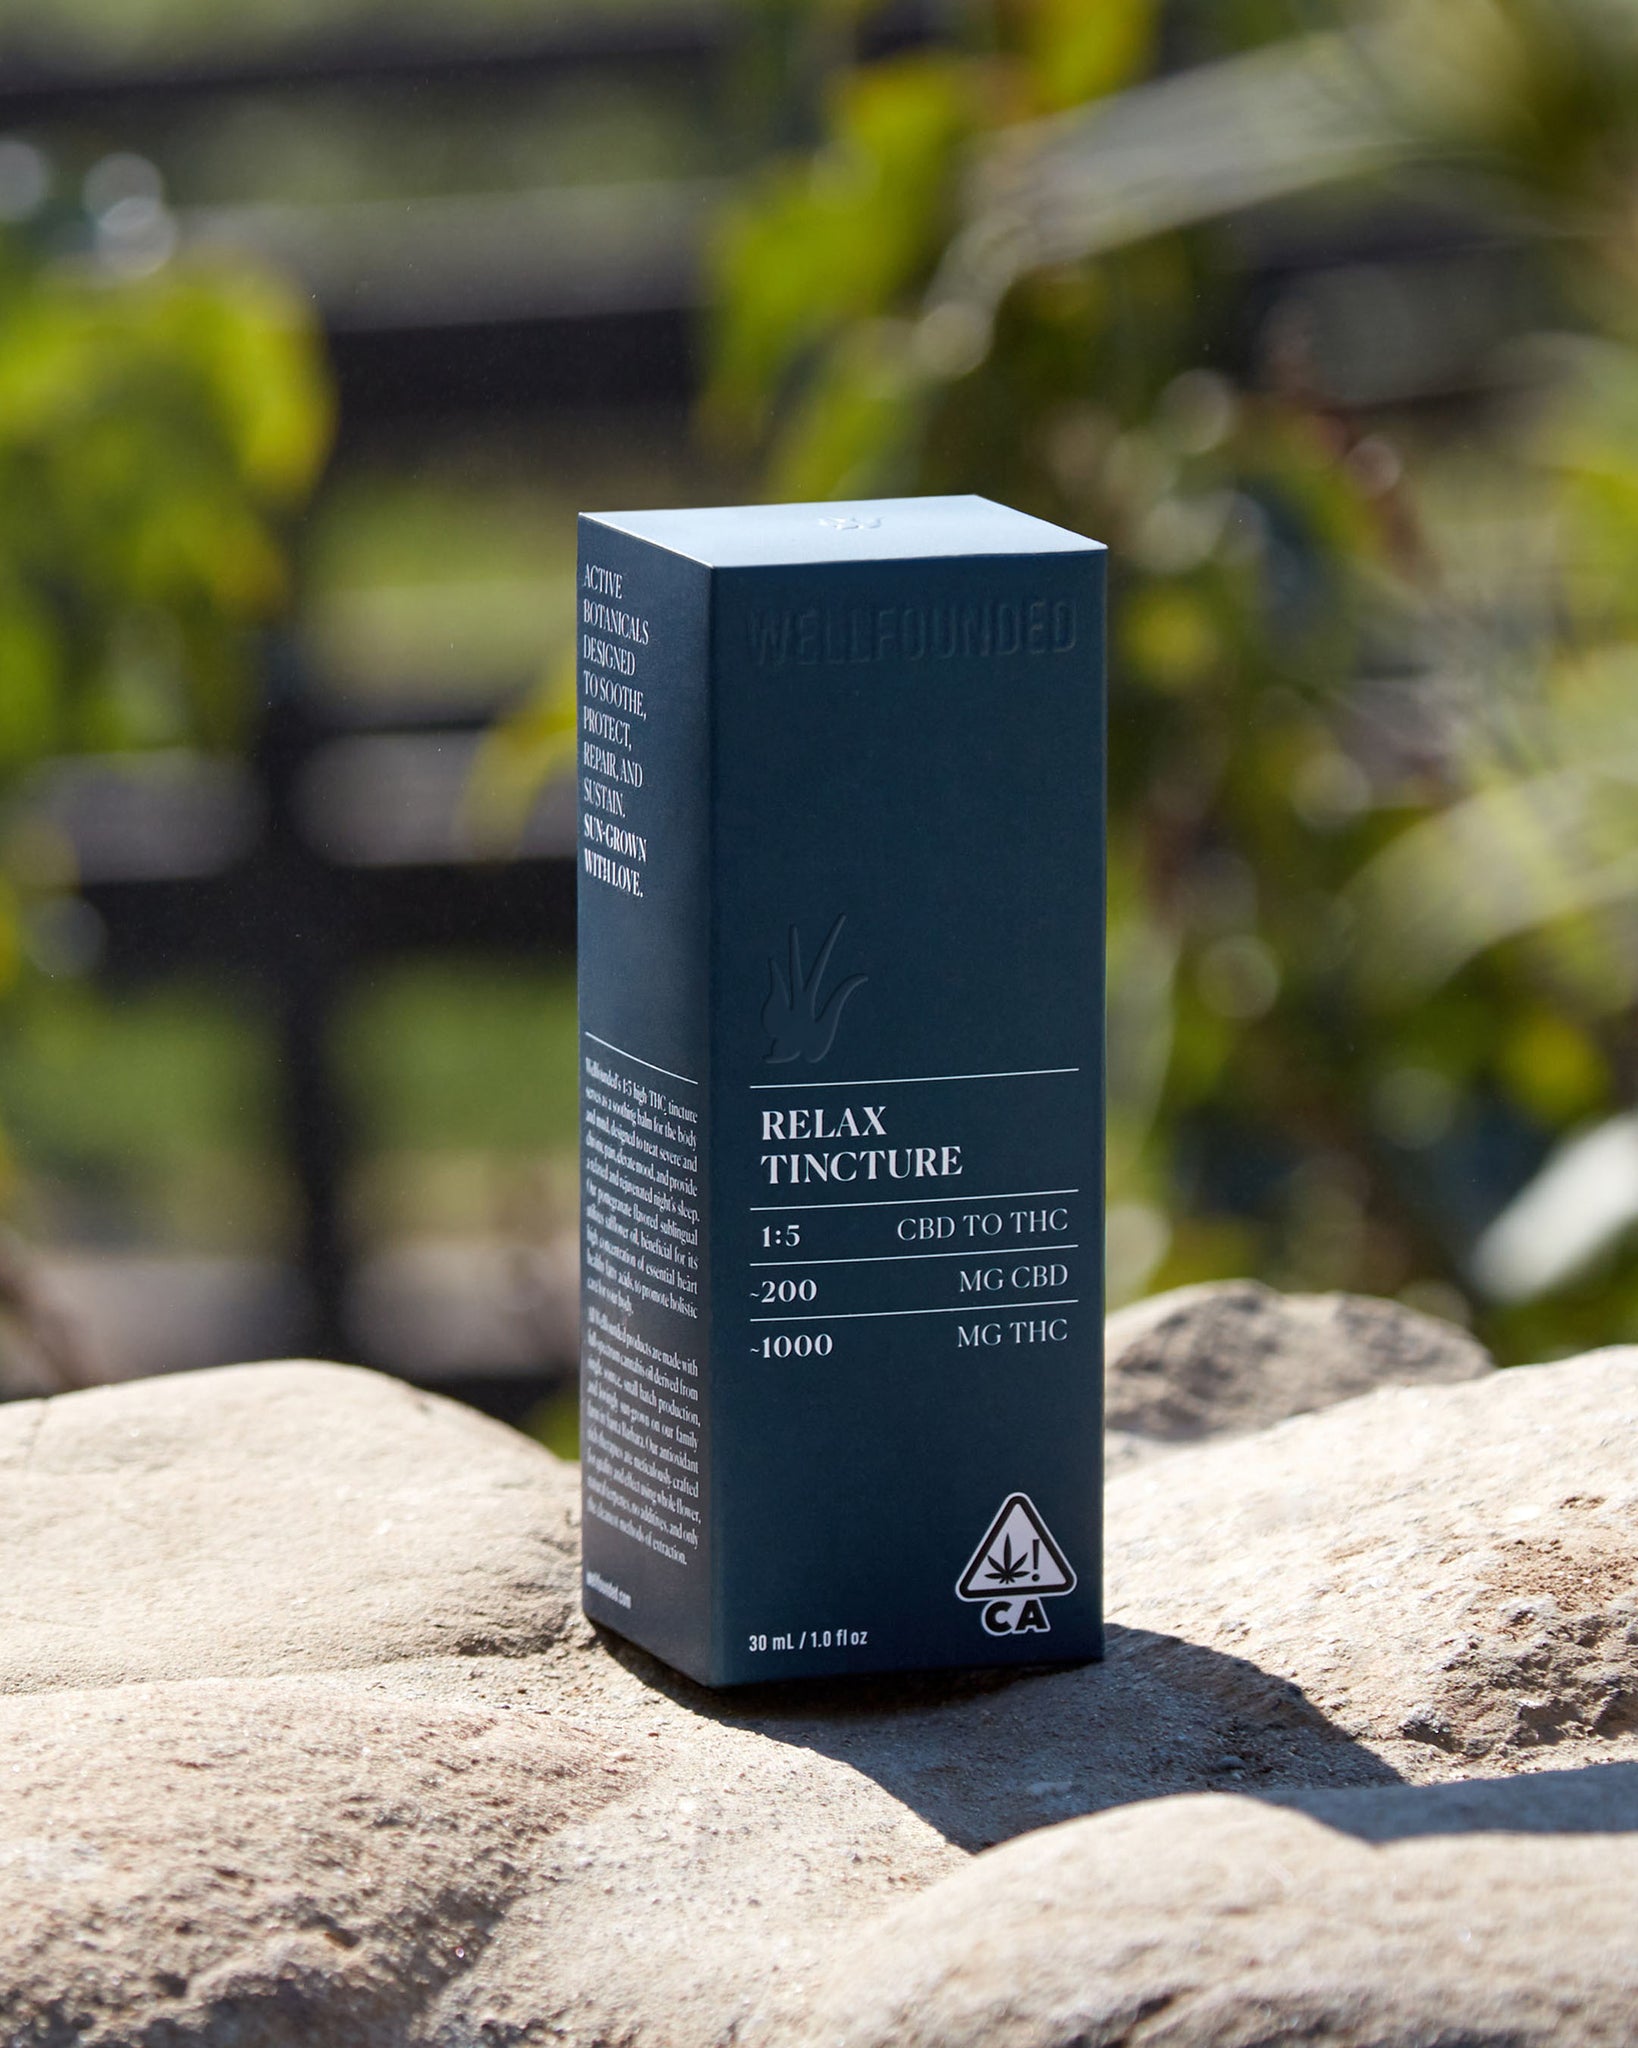 1:5 Relax Tincture – 30 mL